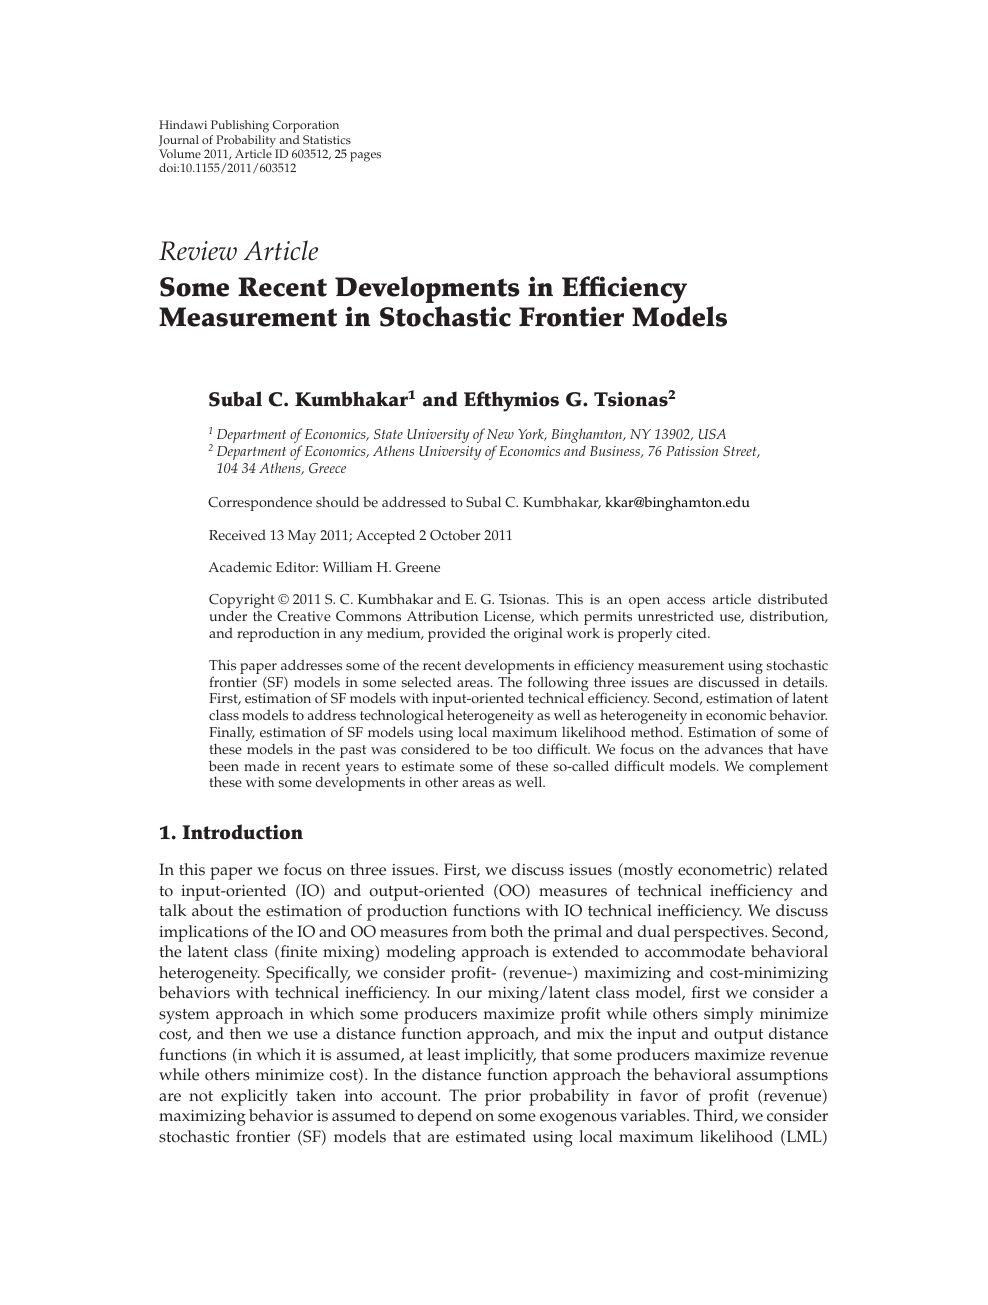 Some Recent Developments In Efficiency Measurement In Stochastic Frontier Models Topic Of Research Paper In Mathematics Download Scholarly Article Pdf And Read For Free On Cyberleninka Open Science Hub